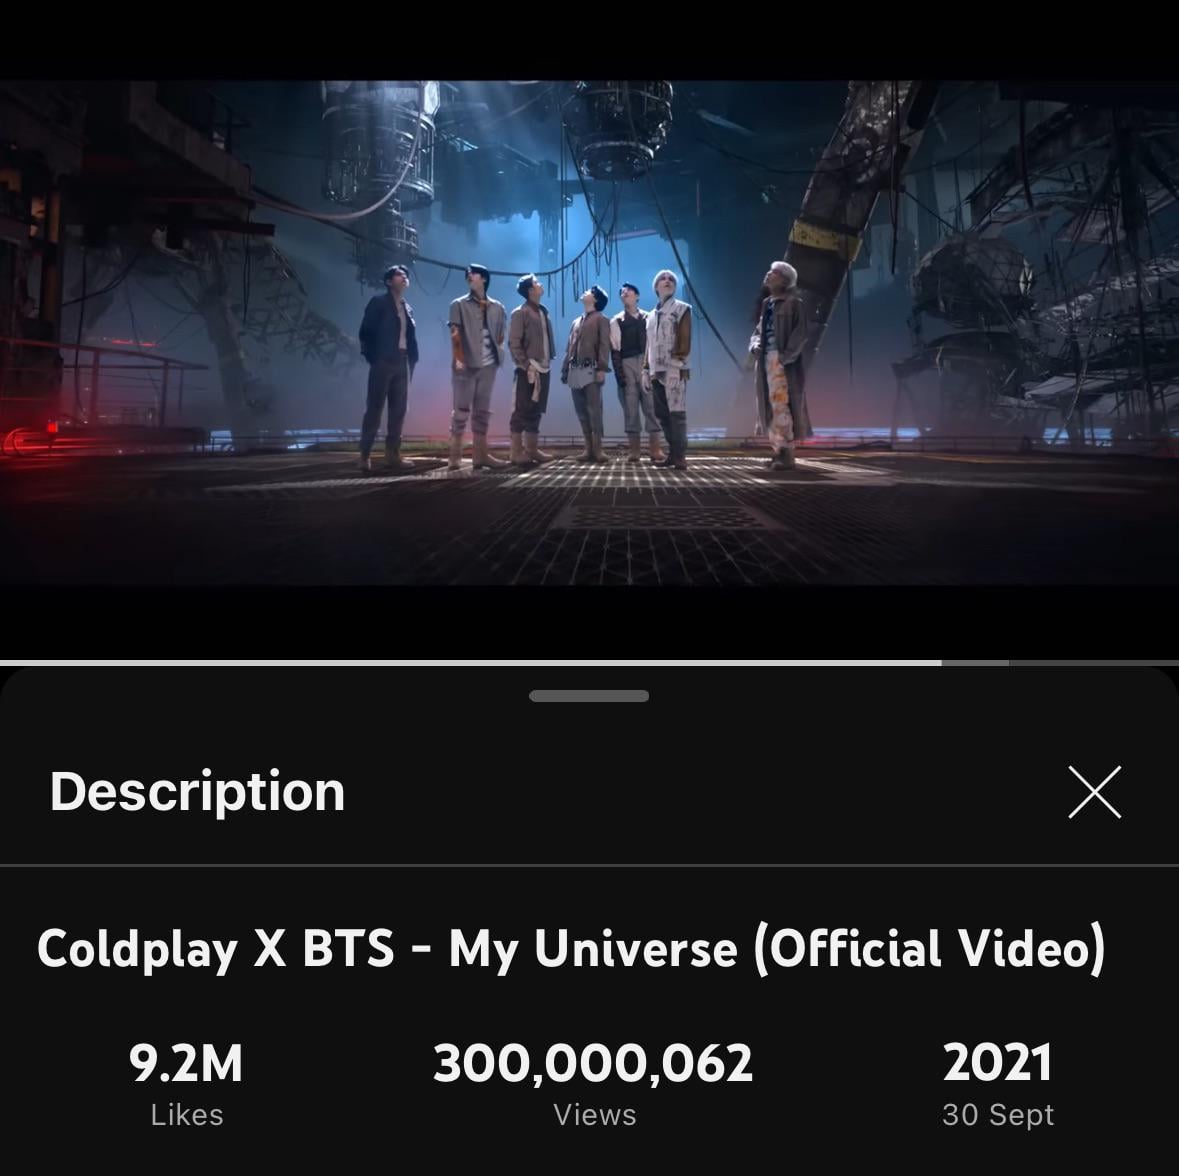 Coldplay x BTS’ “My Universe” MV has now surpassed 300 million views on YouTube! - 100424